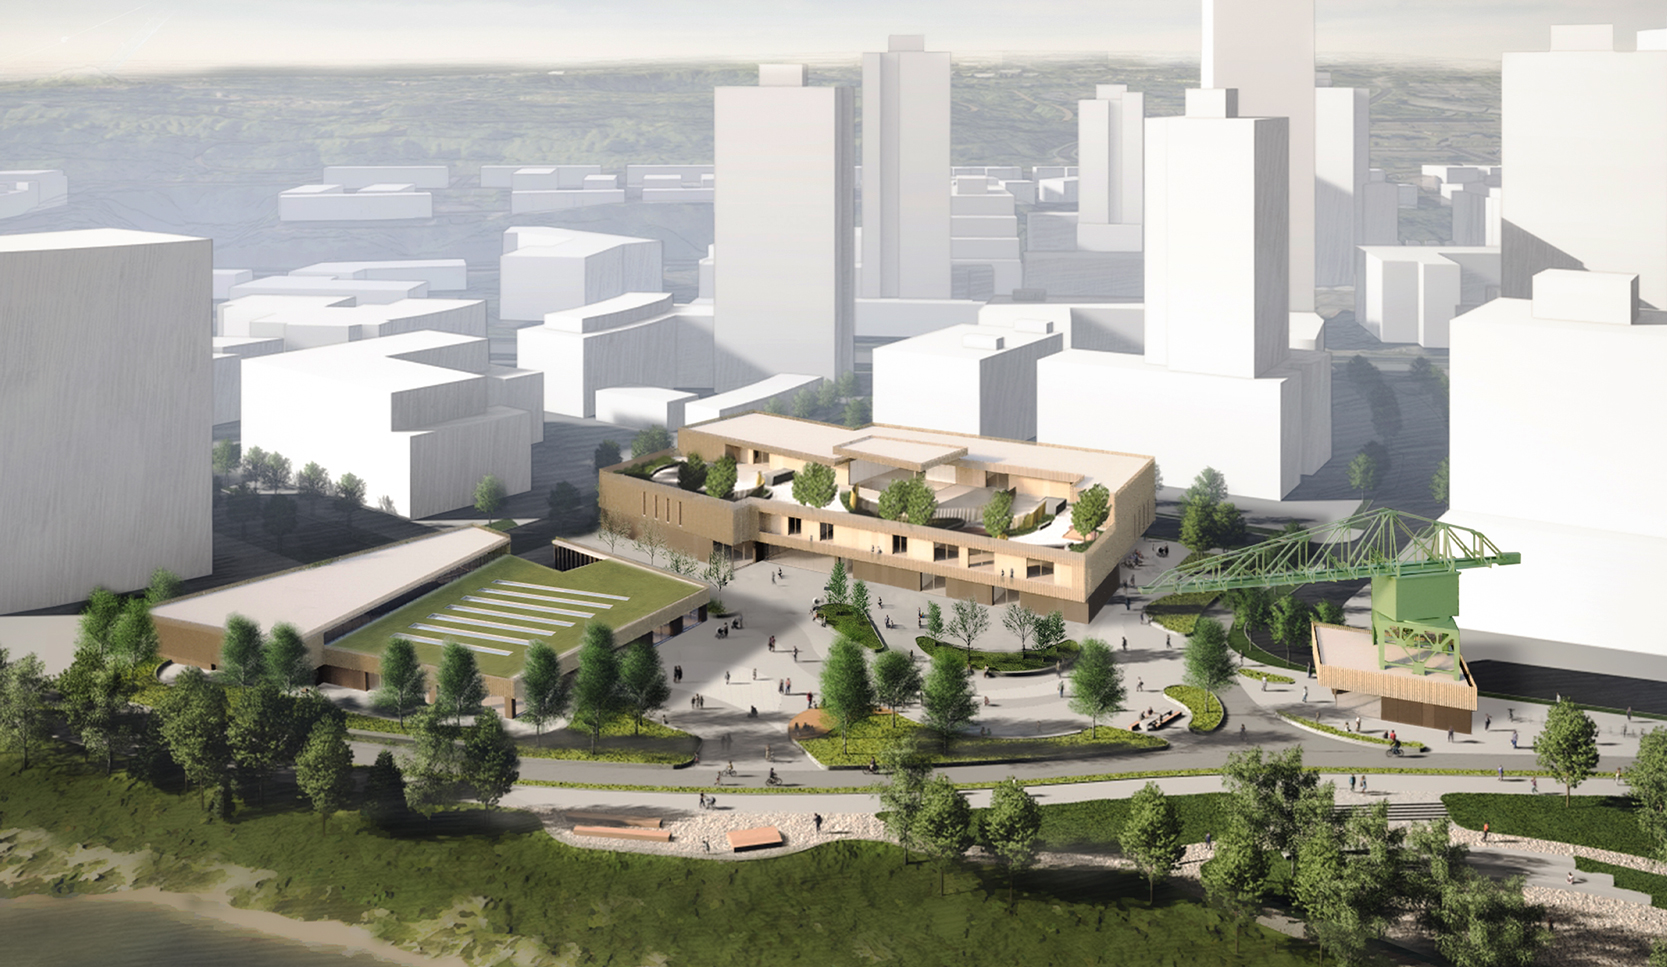 A 3D rendering of River District Community Centre and the environment around it.